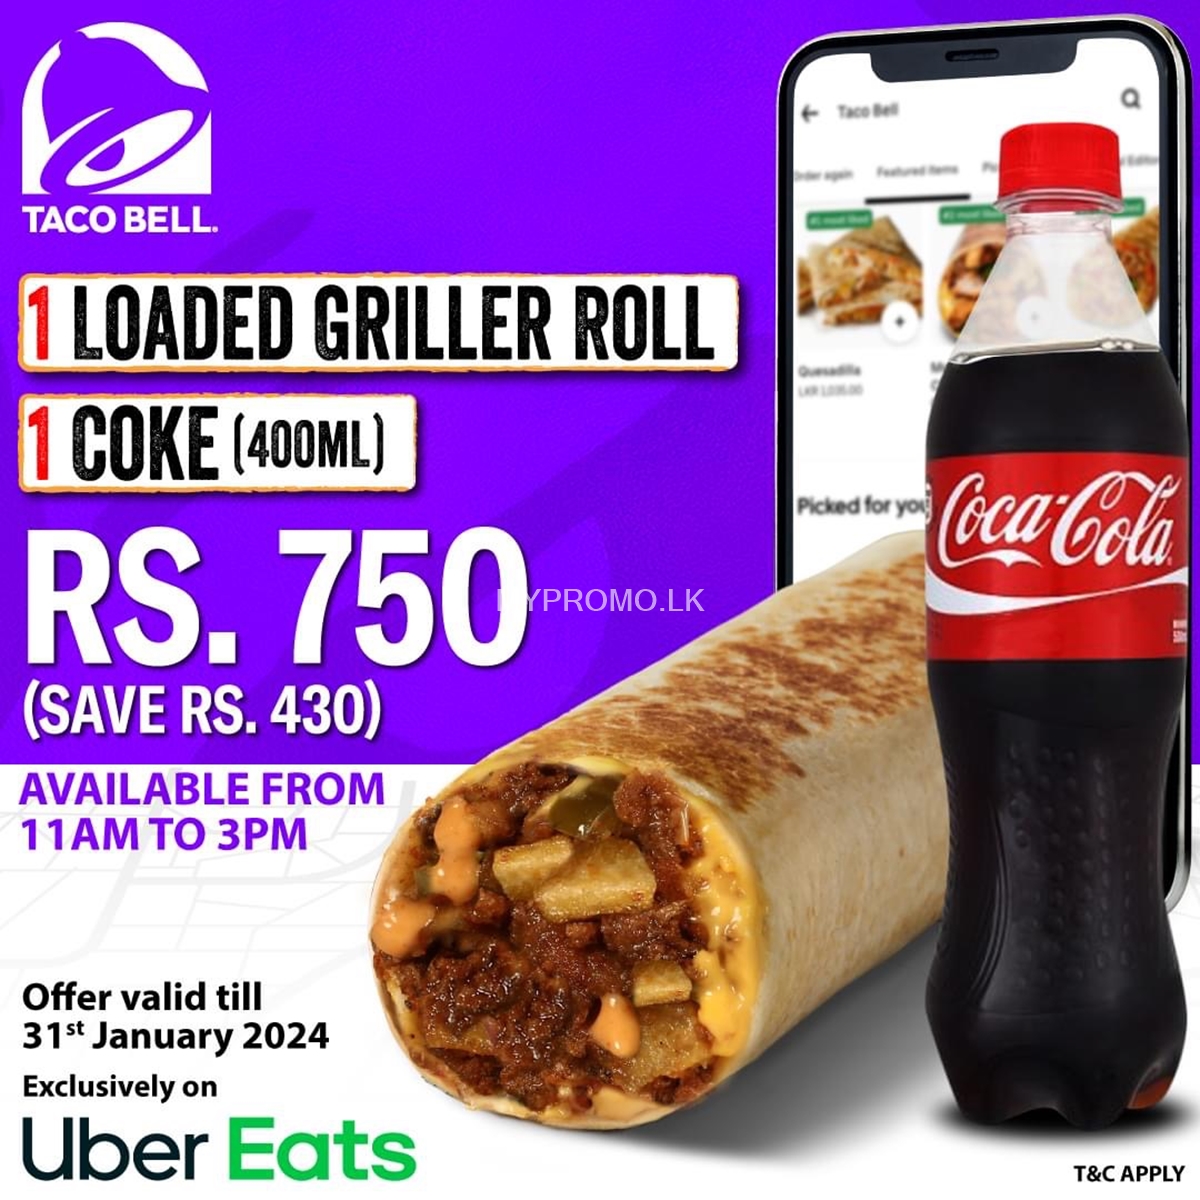 Get 1 Loaded Griller Roll + 1 Coke (400ml) for just Rs. 750 at TACO BELL Sri Lanka